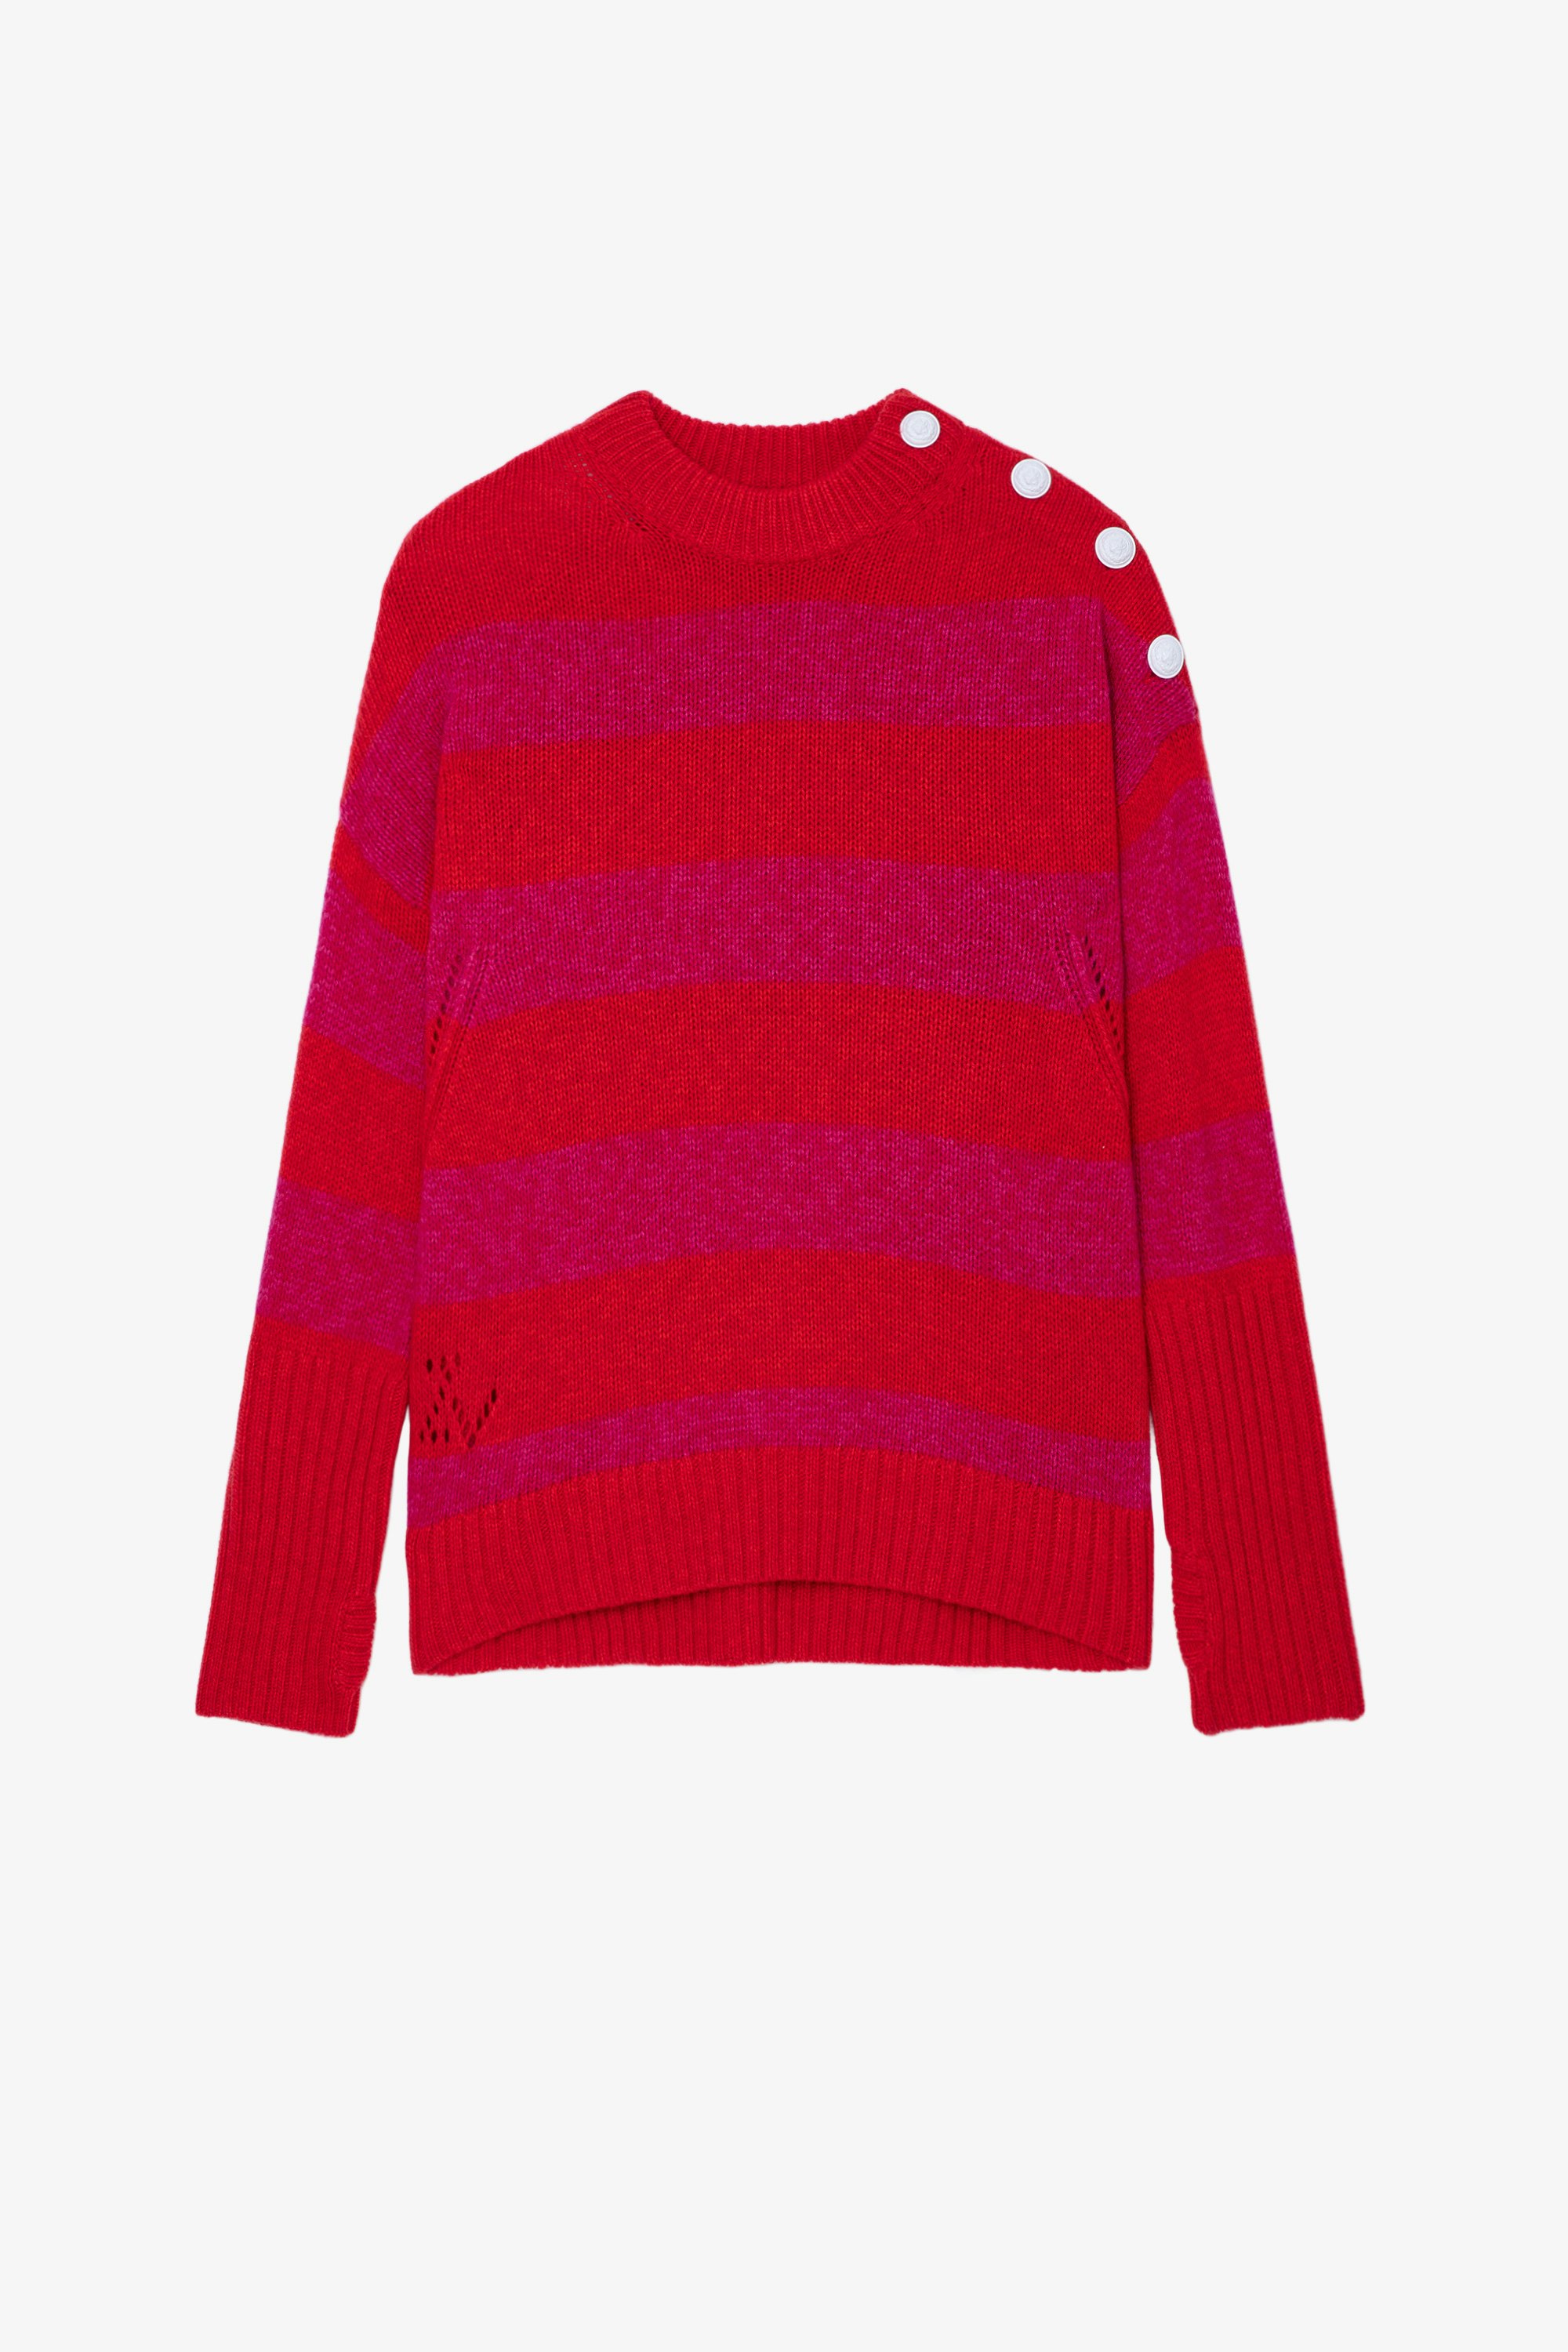 Malta Cashmere Jumper Women’s cashmere jumper with buttons and pink and orange stripes